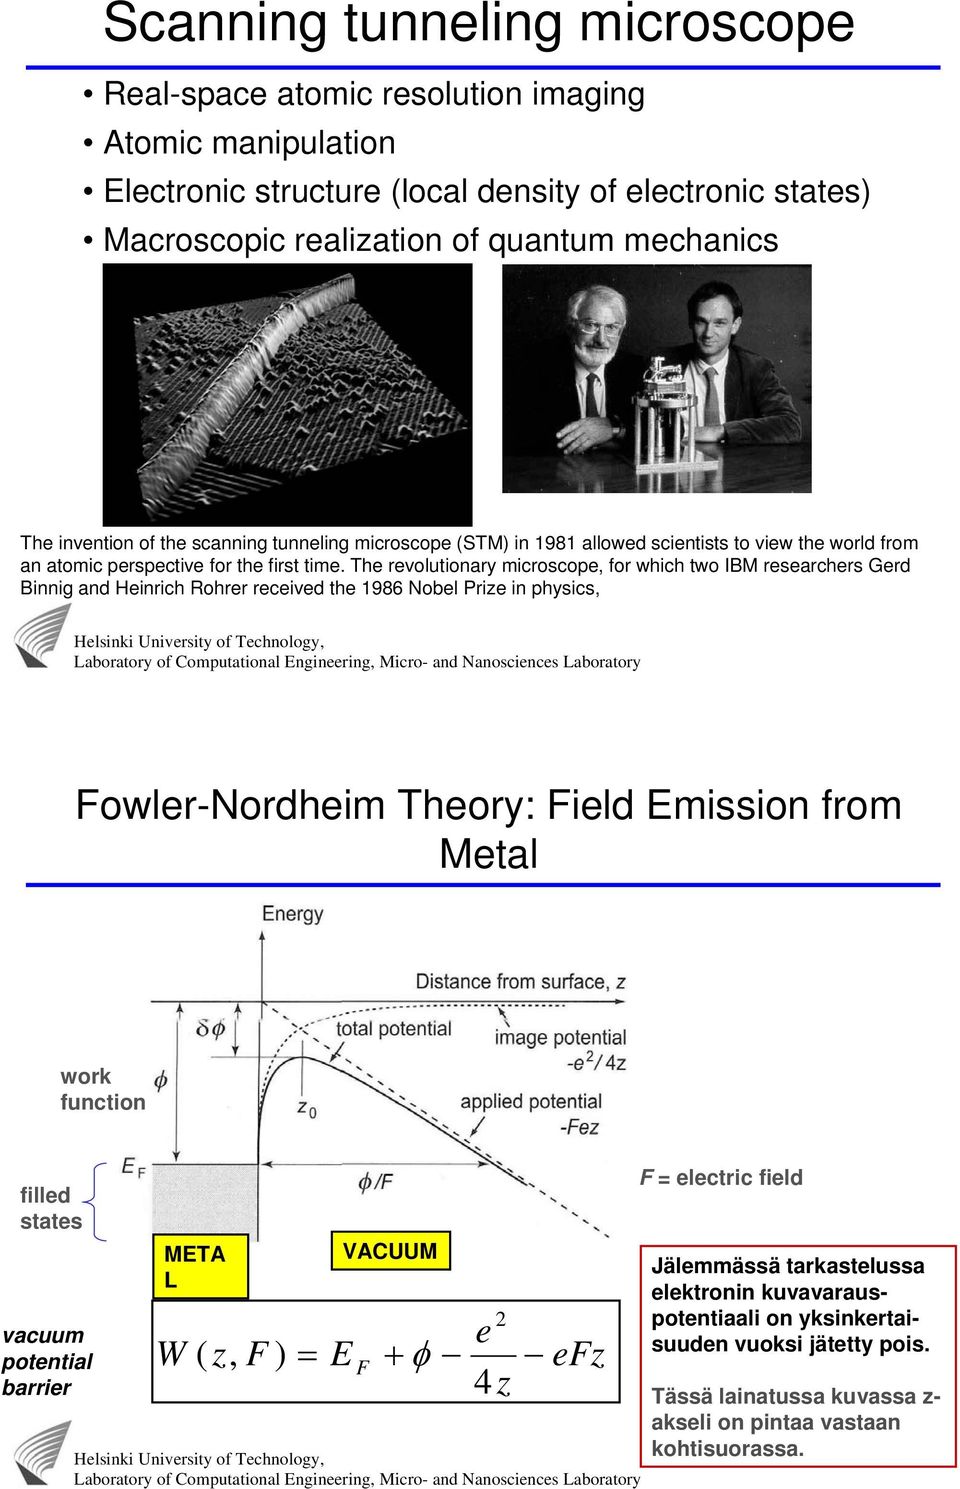 Carbon The revolutionary microscope, for which two IBM researchers Gerd Binnig and Heinrich Rohrer received the Nanotube 1986 Nobel on Si Prize in physics, Fowler-Nordheim Theory: Field Emission from